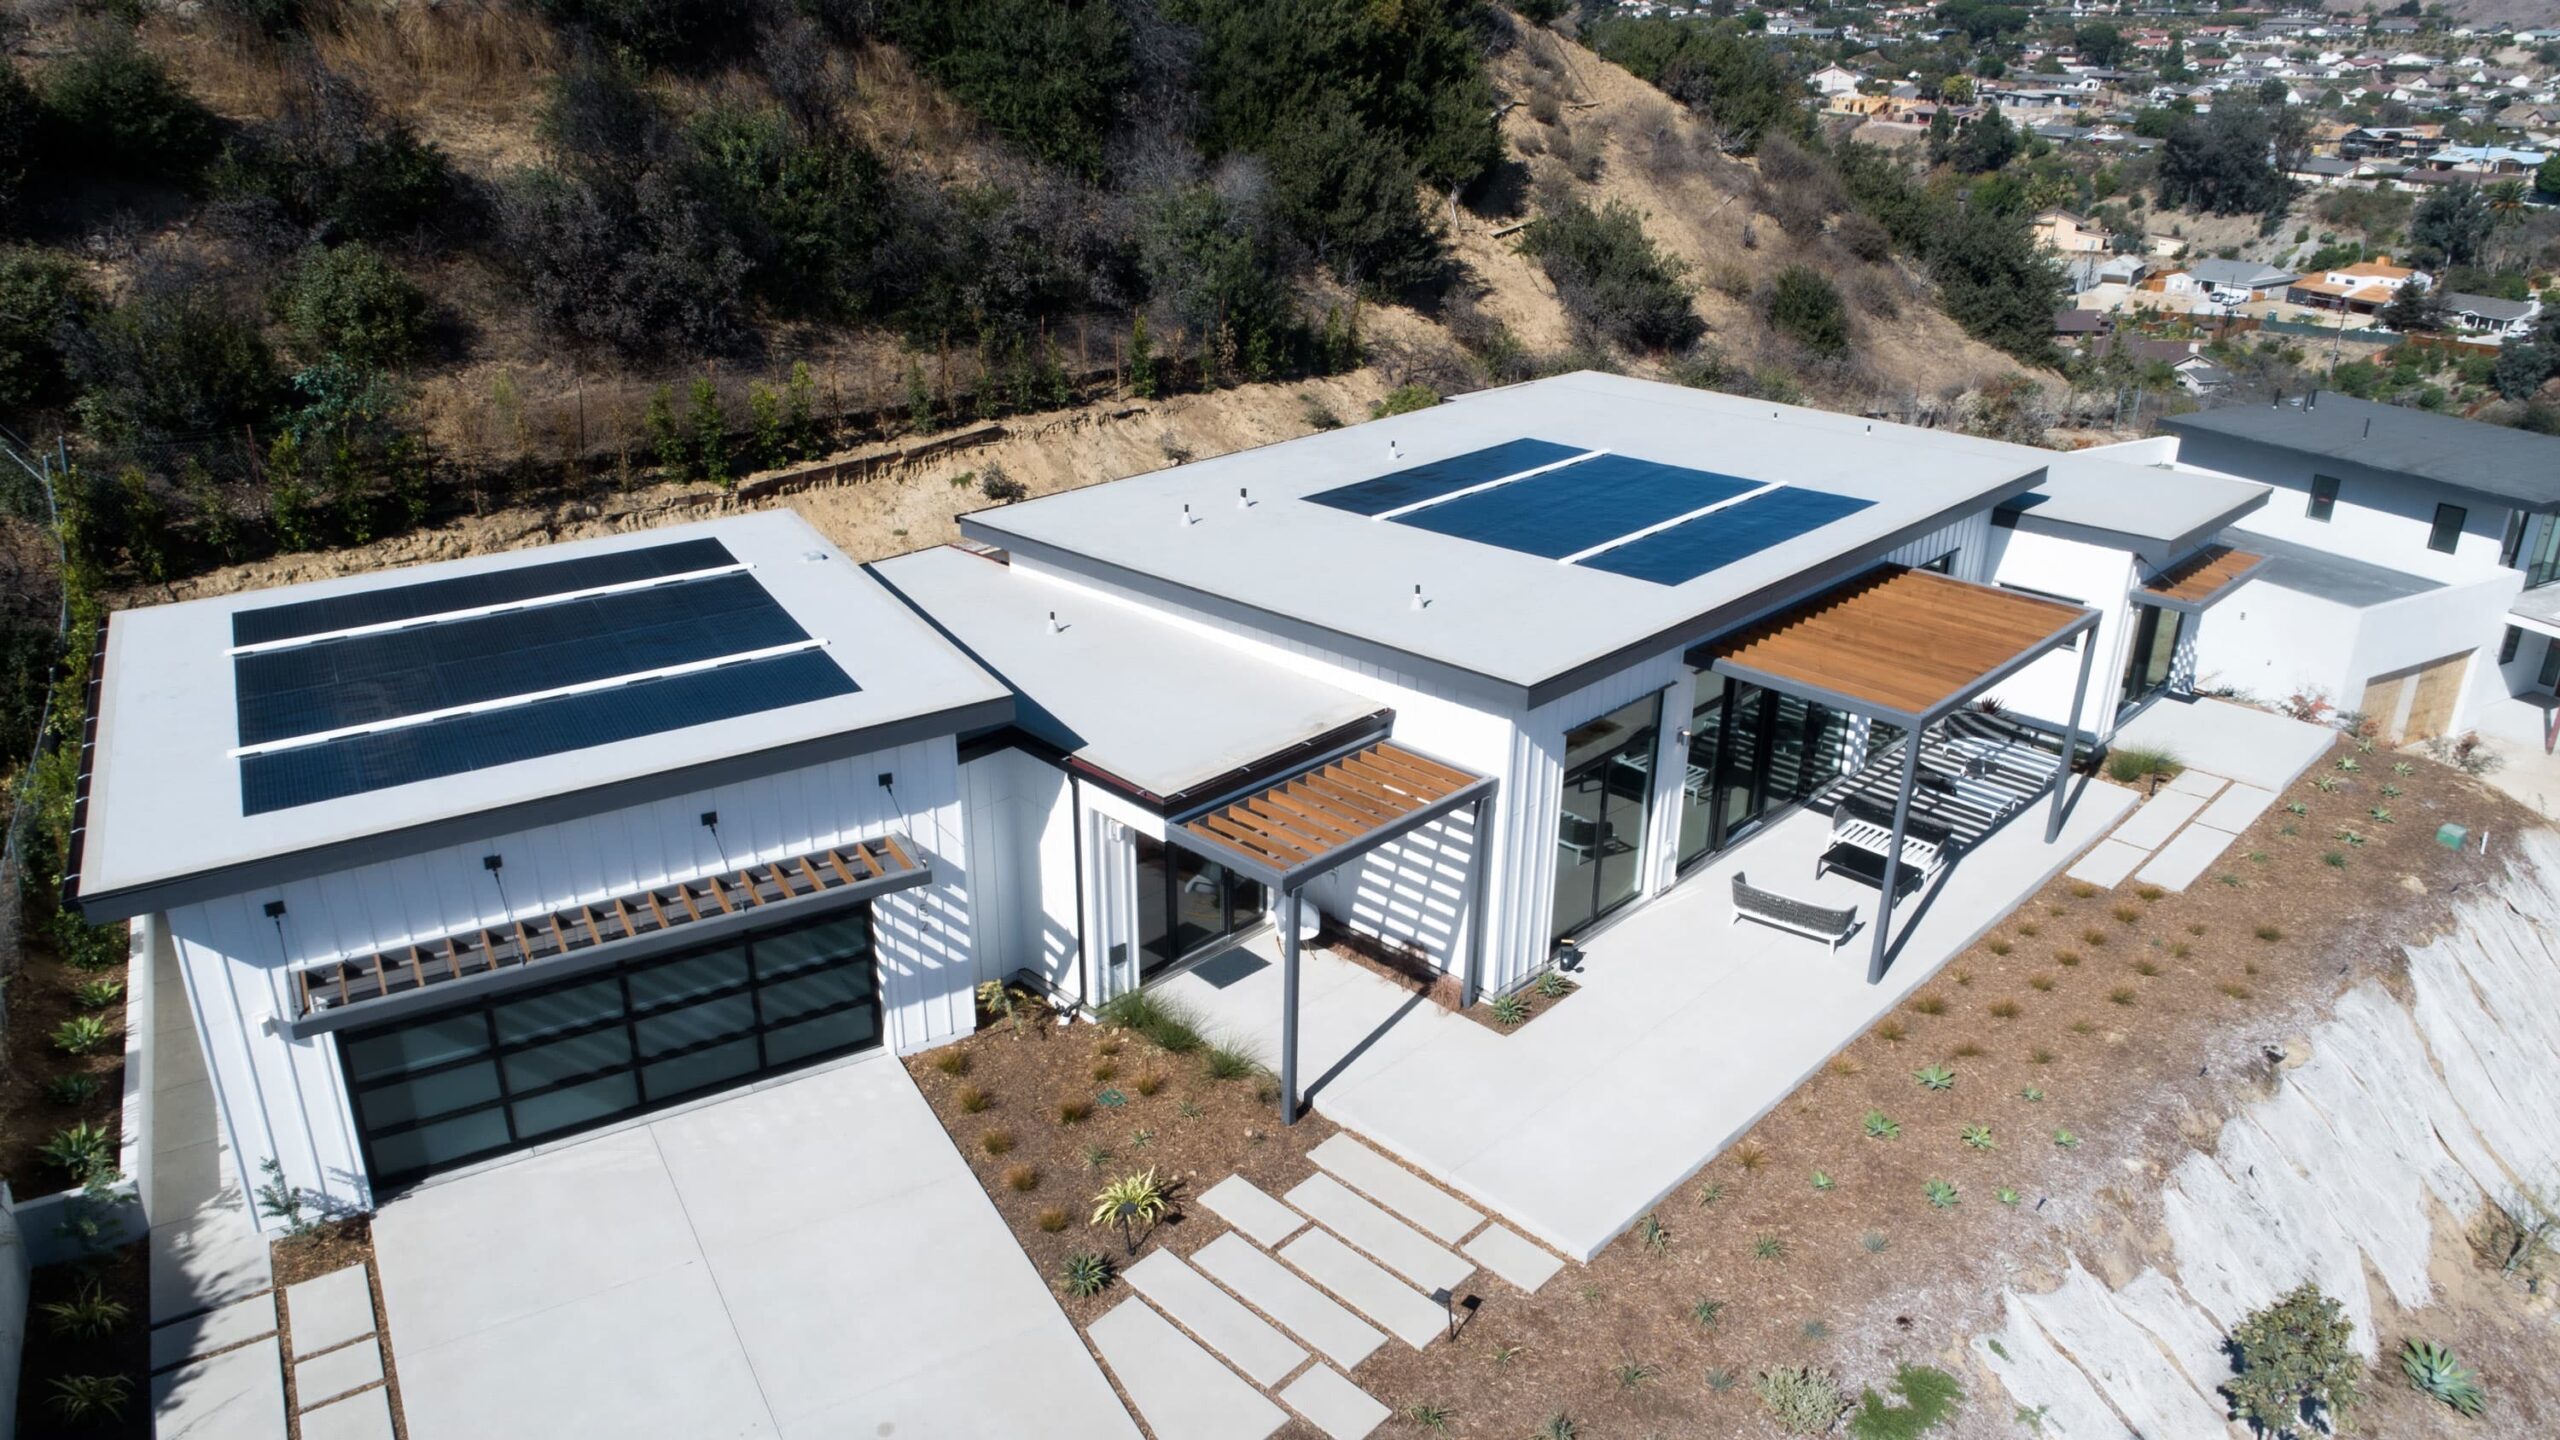 Local weather change creates demand for off-the-grid houses